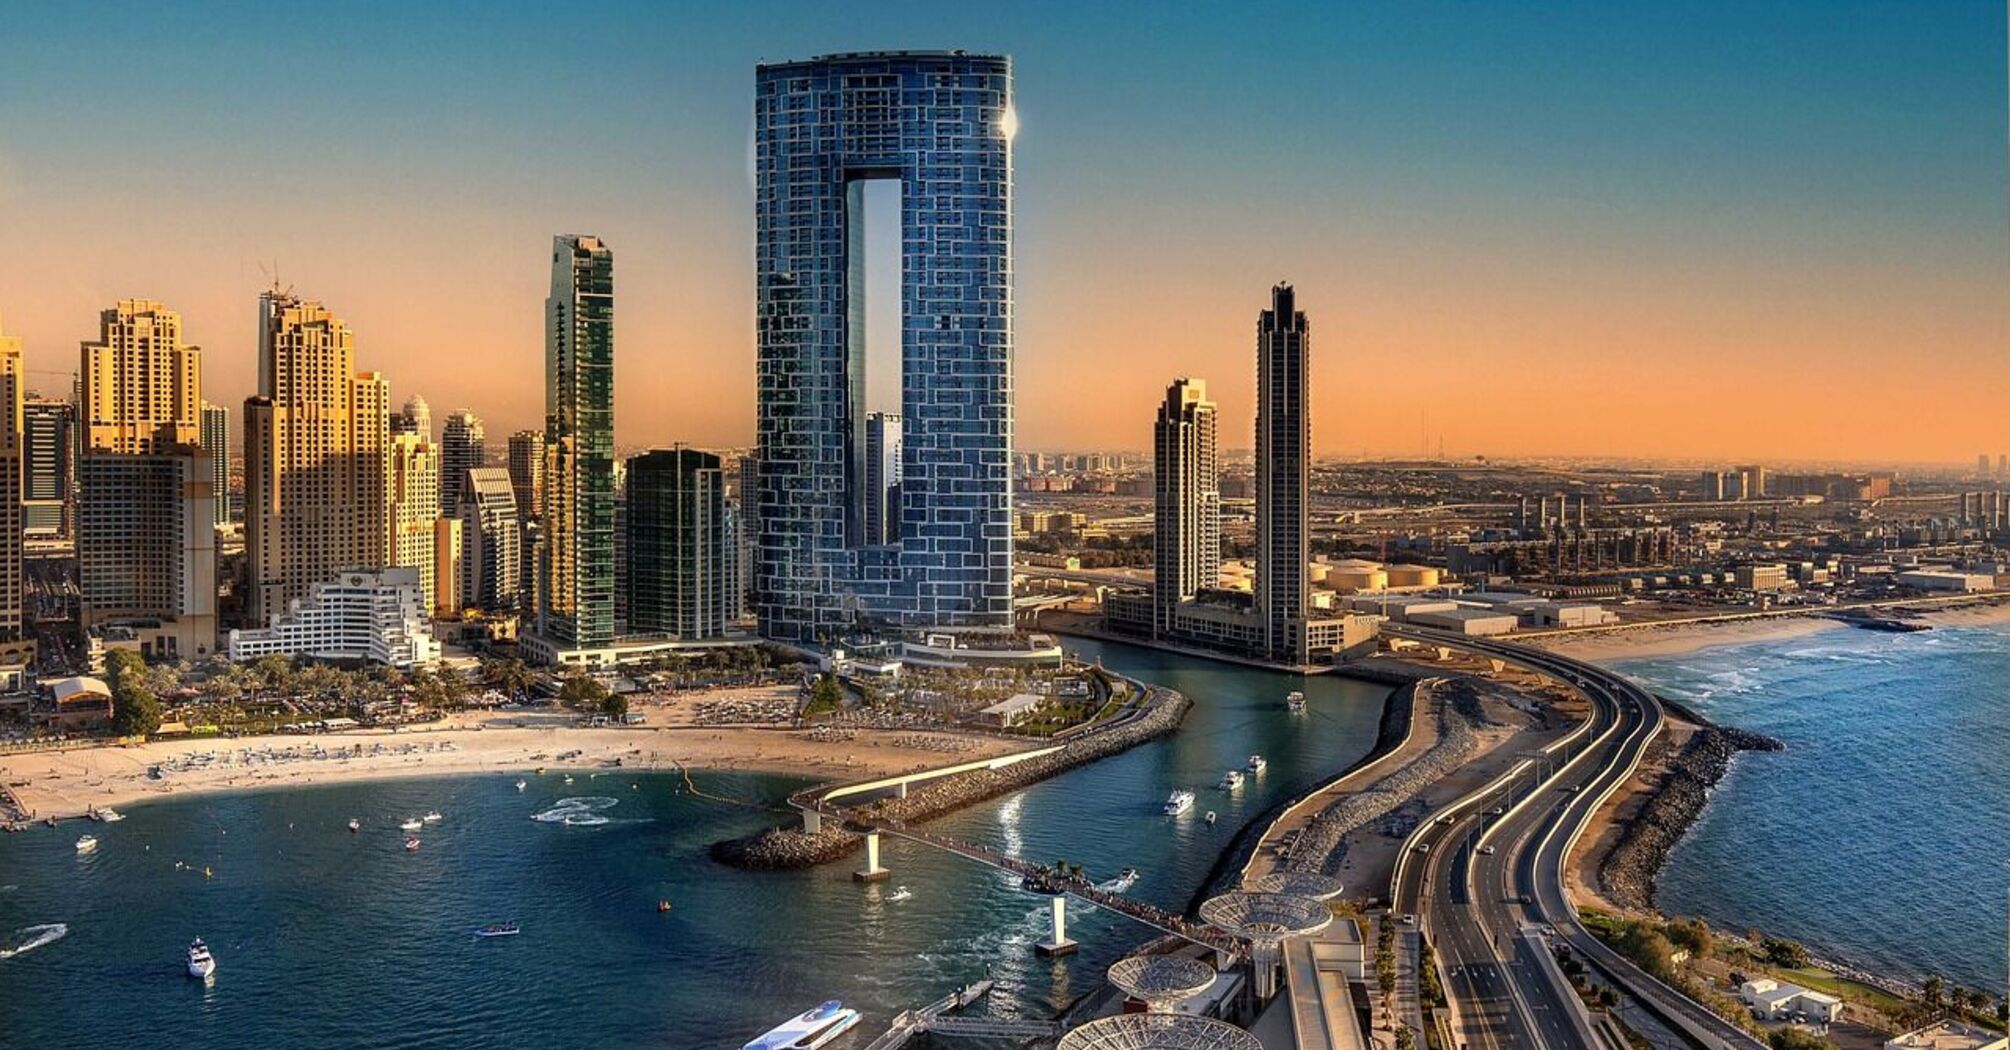 Marvel at the uniqueness: amazing things that can only be seen in Dubai